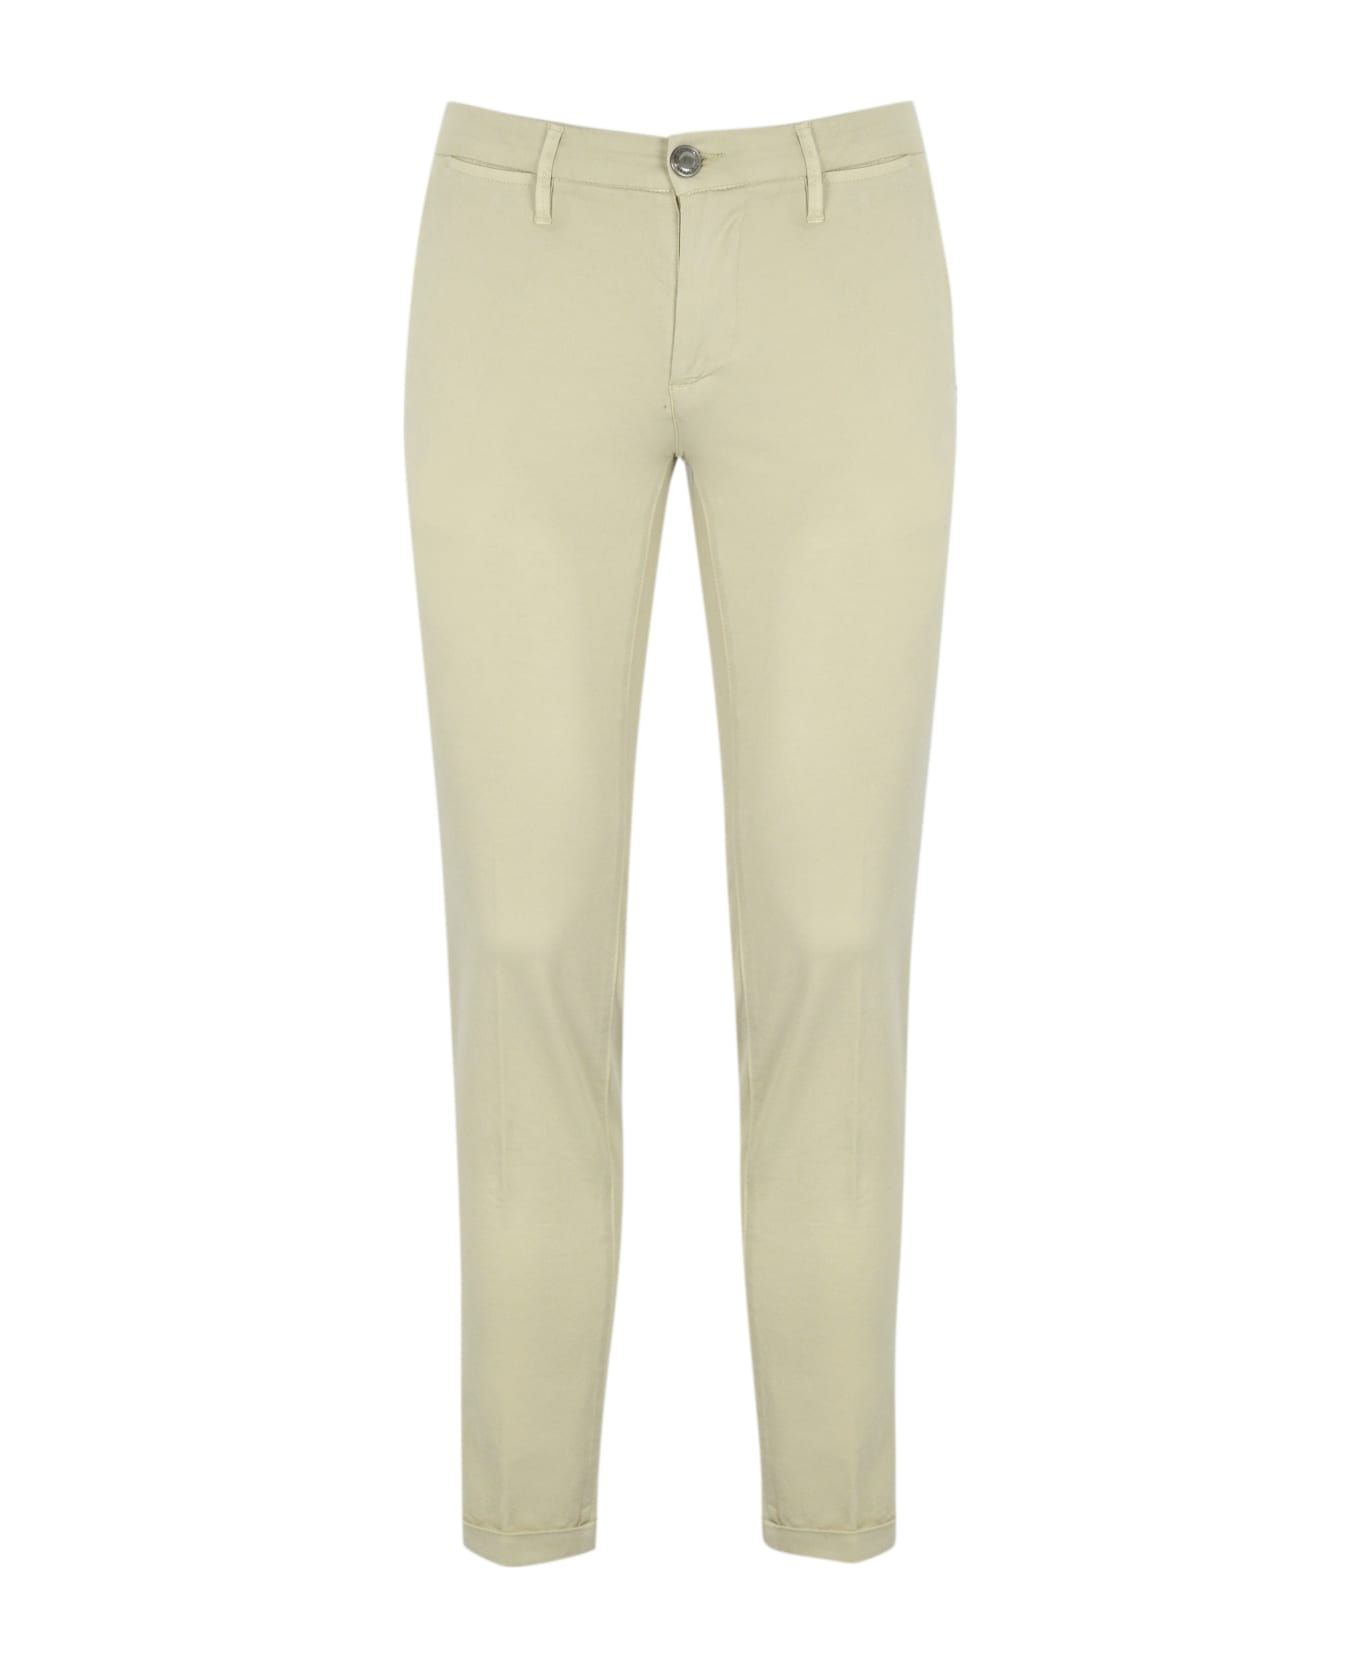 Re-HasH Chino Trousers - Beige